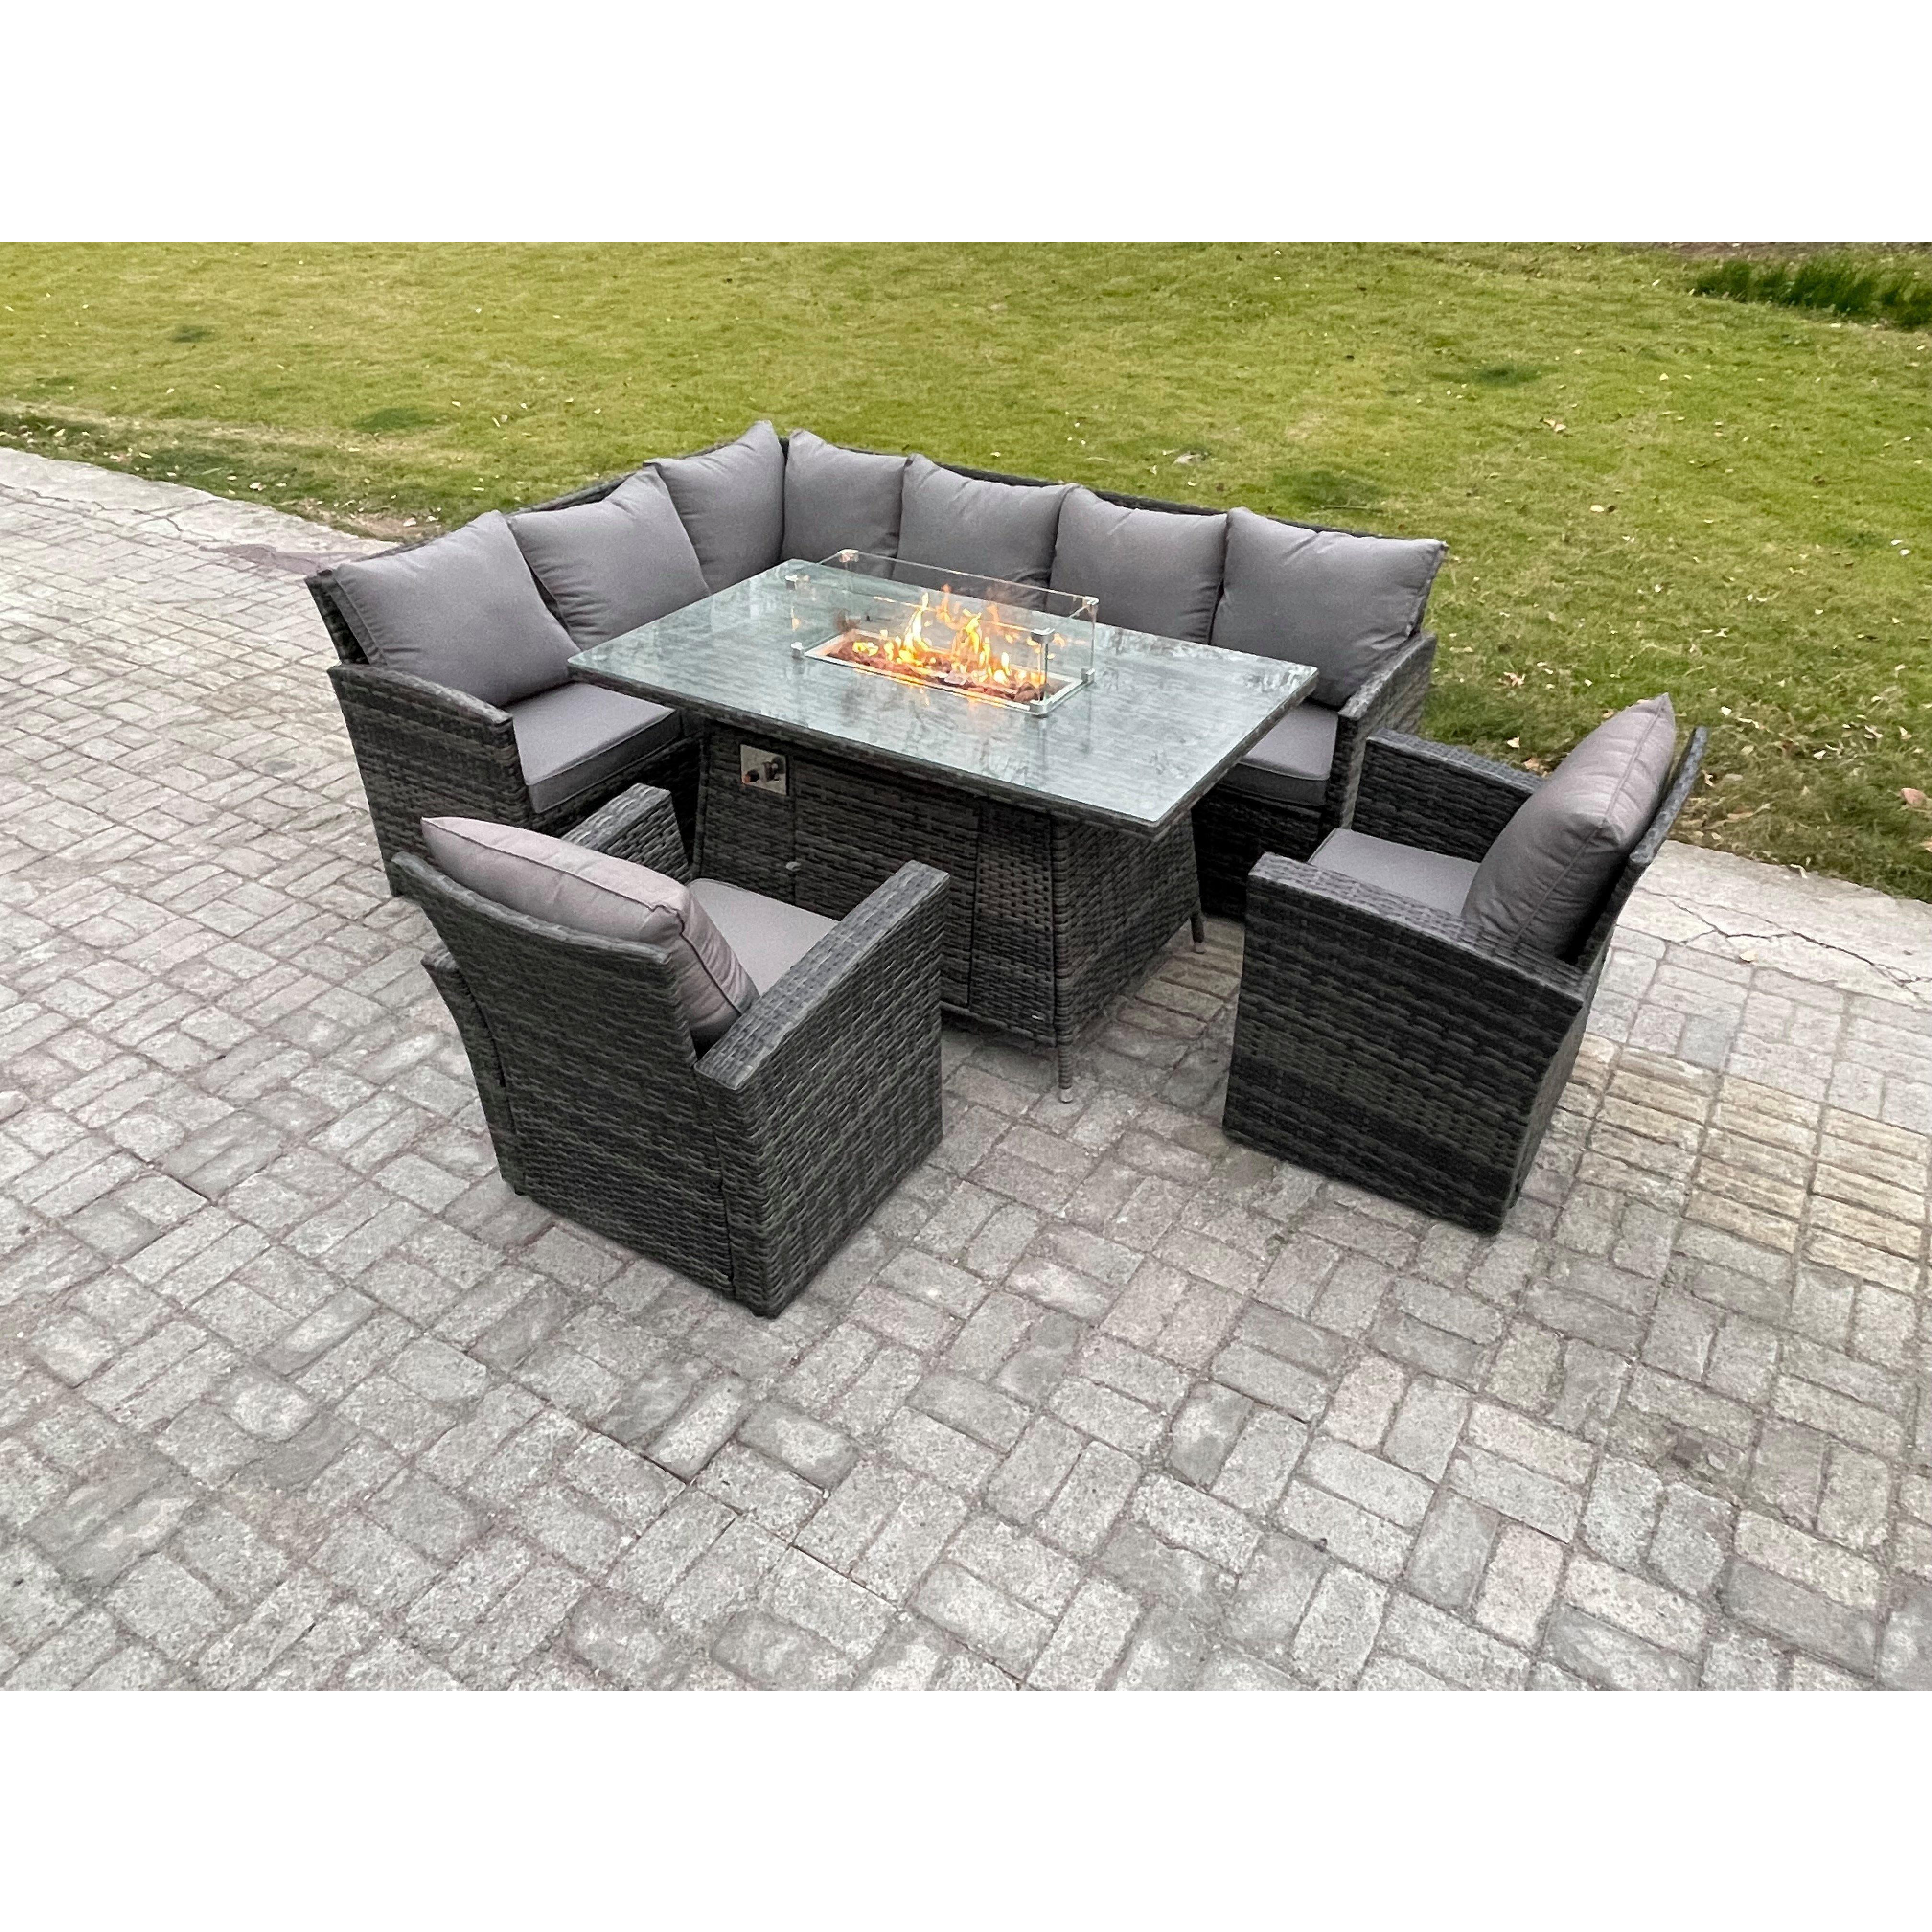 Rattan Garden Furniture High Back Corner Sofa Gas Fire Pit Dining Table Sets Gas Heater with 2 Armchairs 8 Seater - image 1